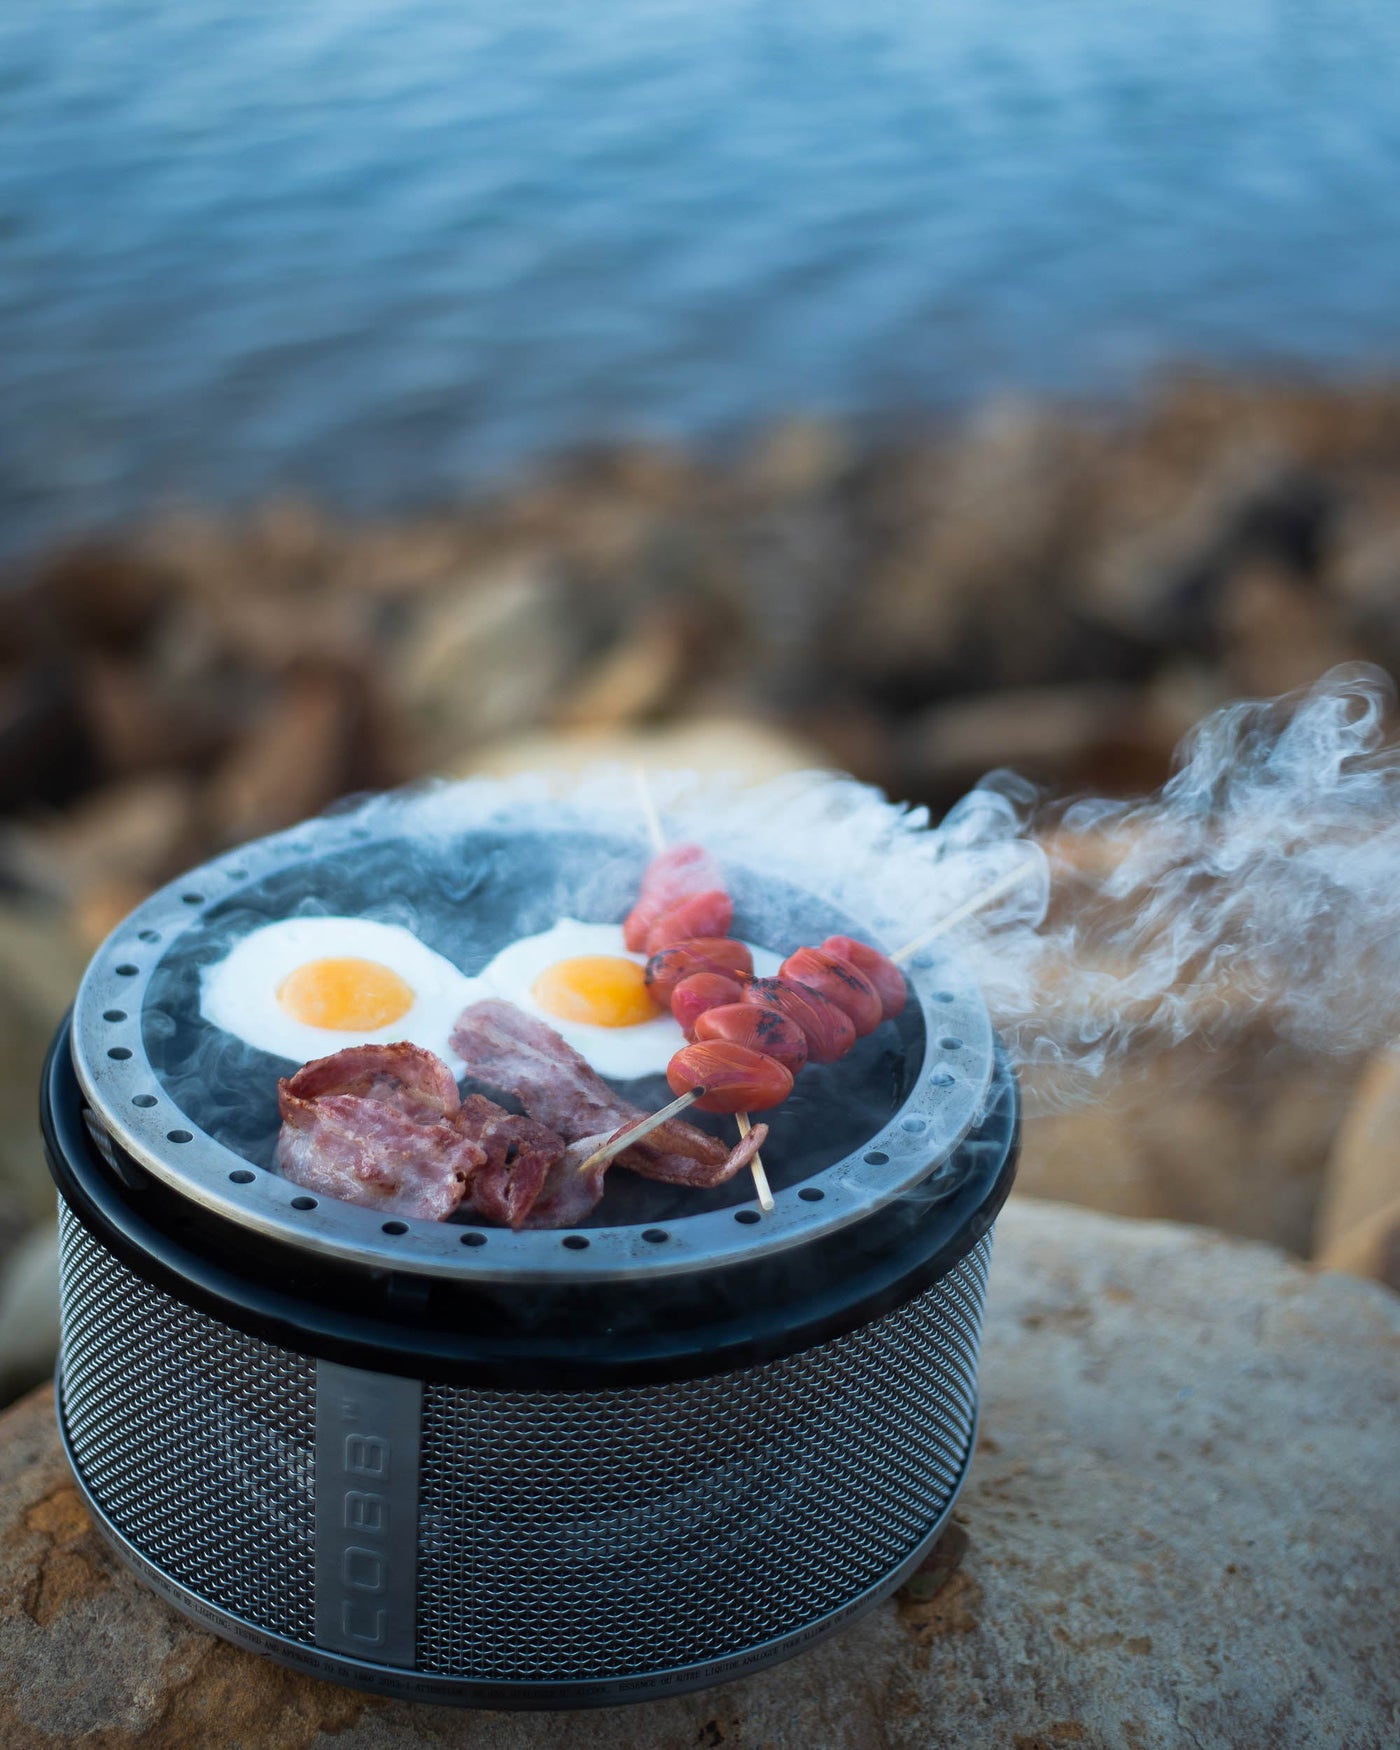 Portable camping BBQ COBB grill new zealand